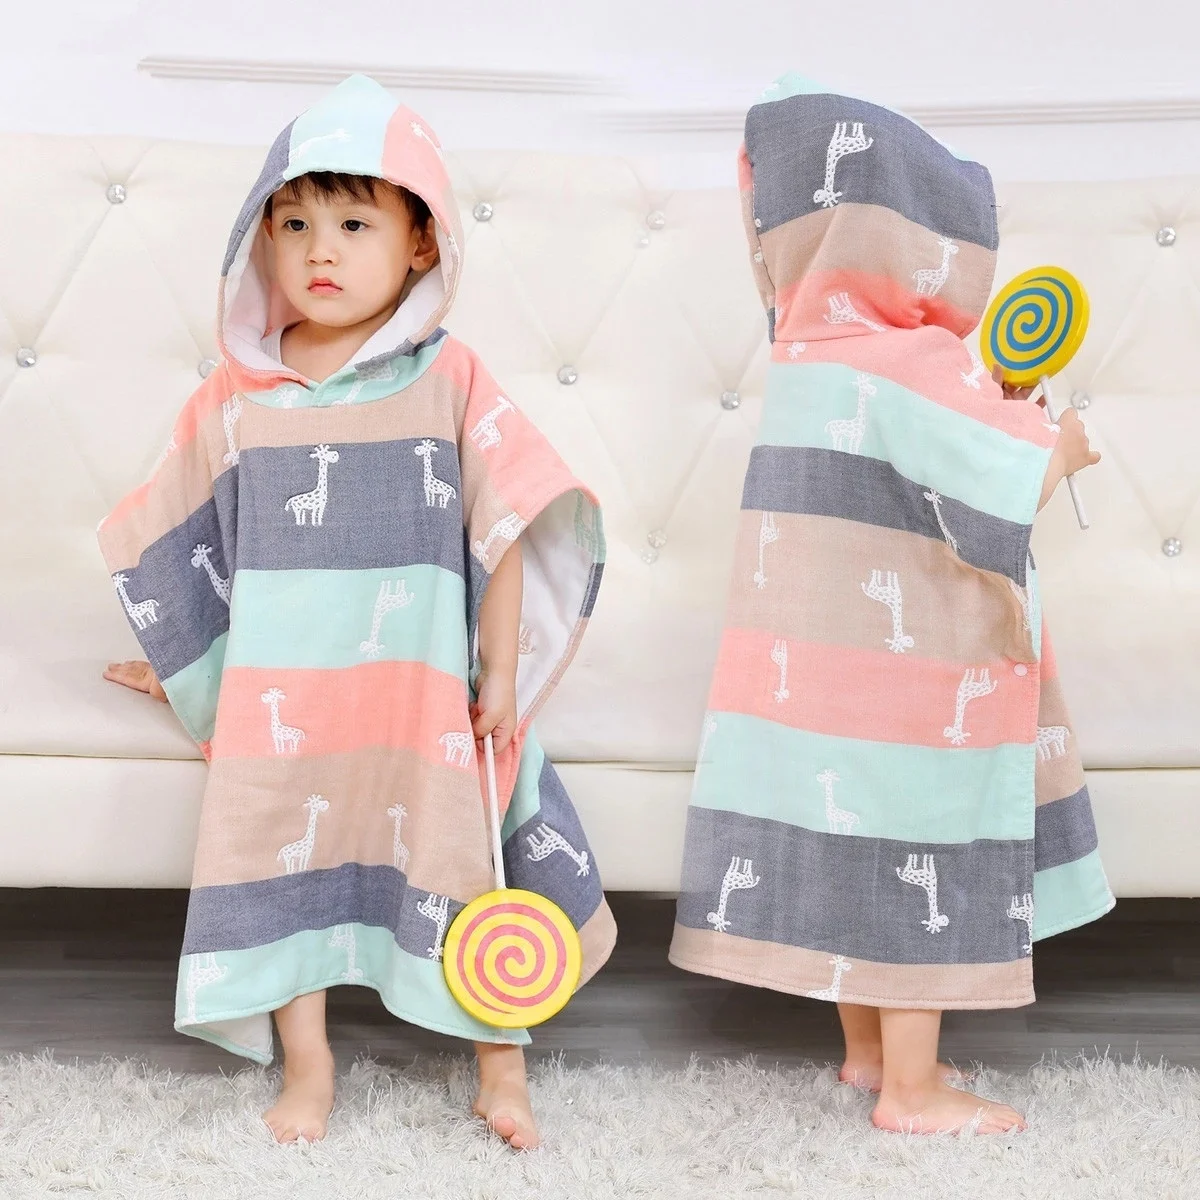 

6 Layers Gauze Hooded Beach Towel Cotton Baby Cape Towels Soft Poncho Kids Bathing Stuff For Babies Washcloth